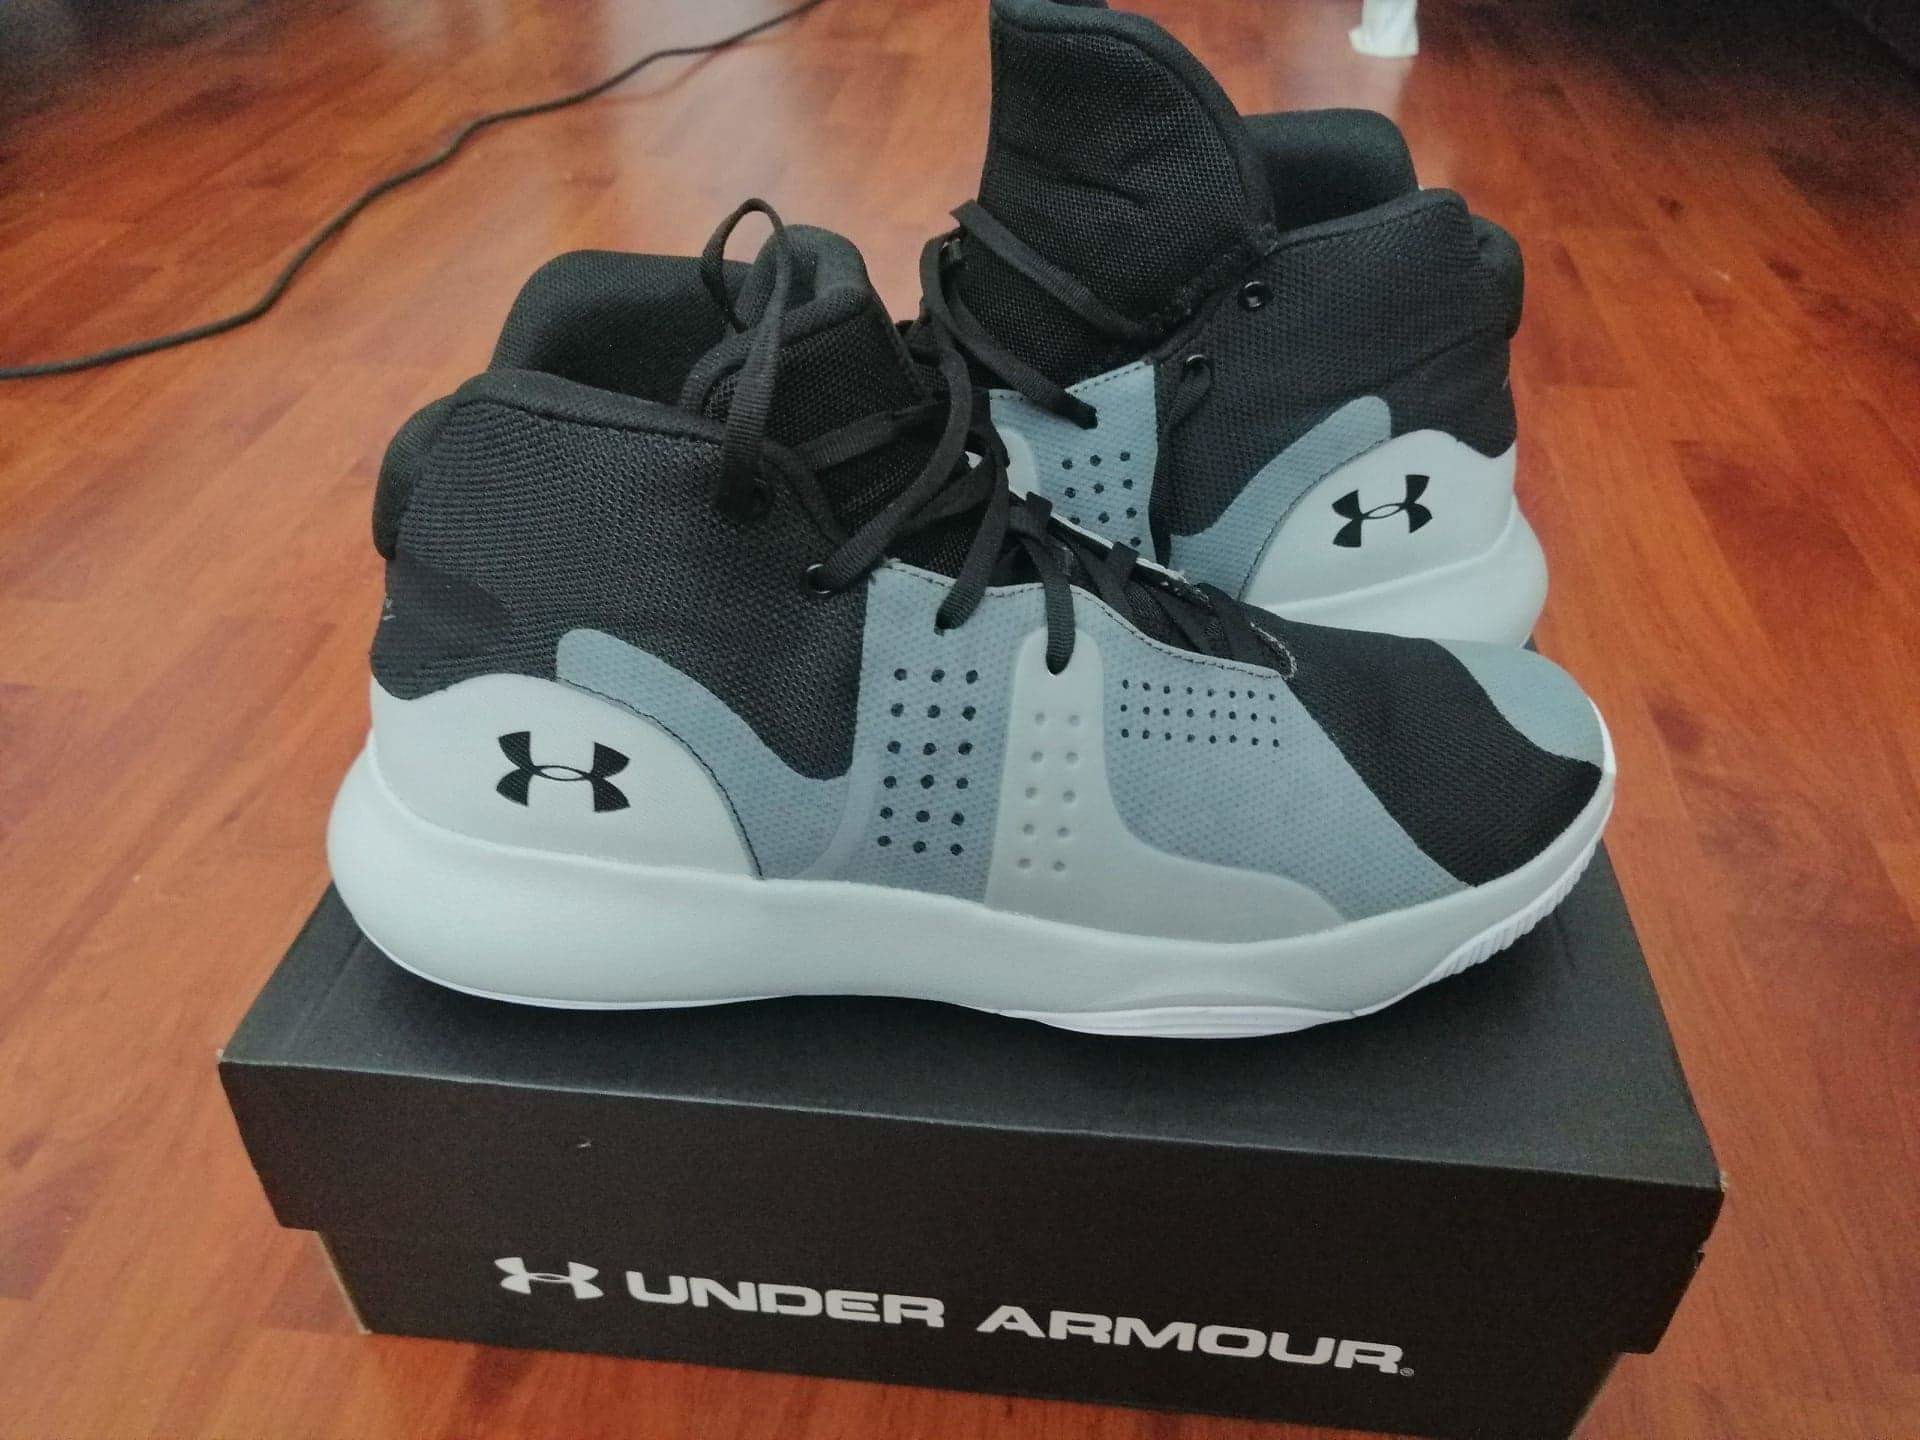 ua anomaly basketball shoes review